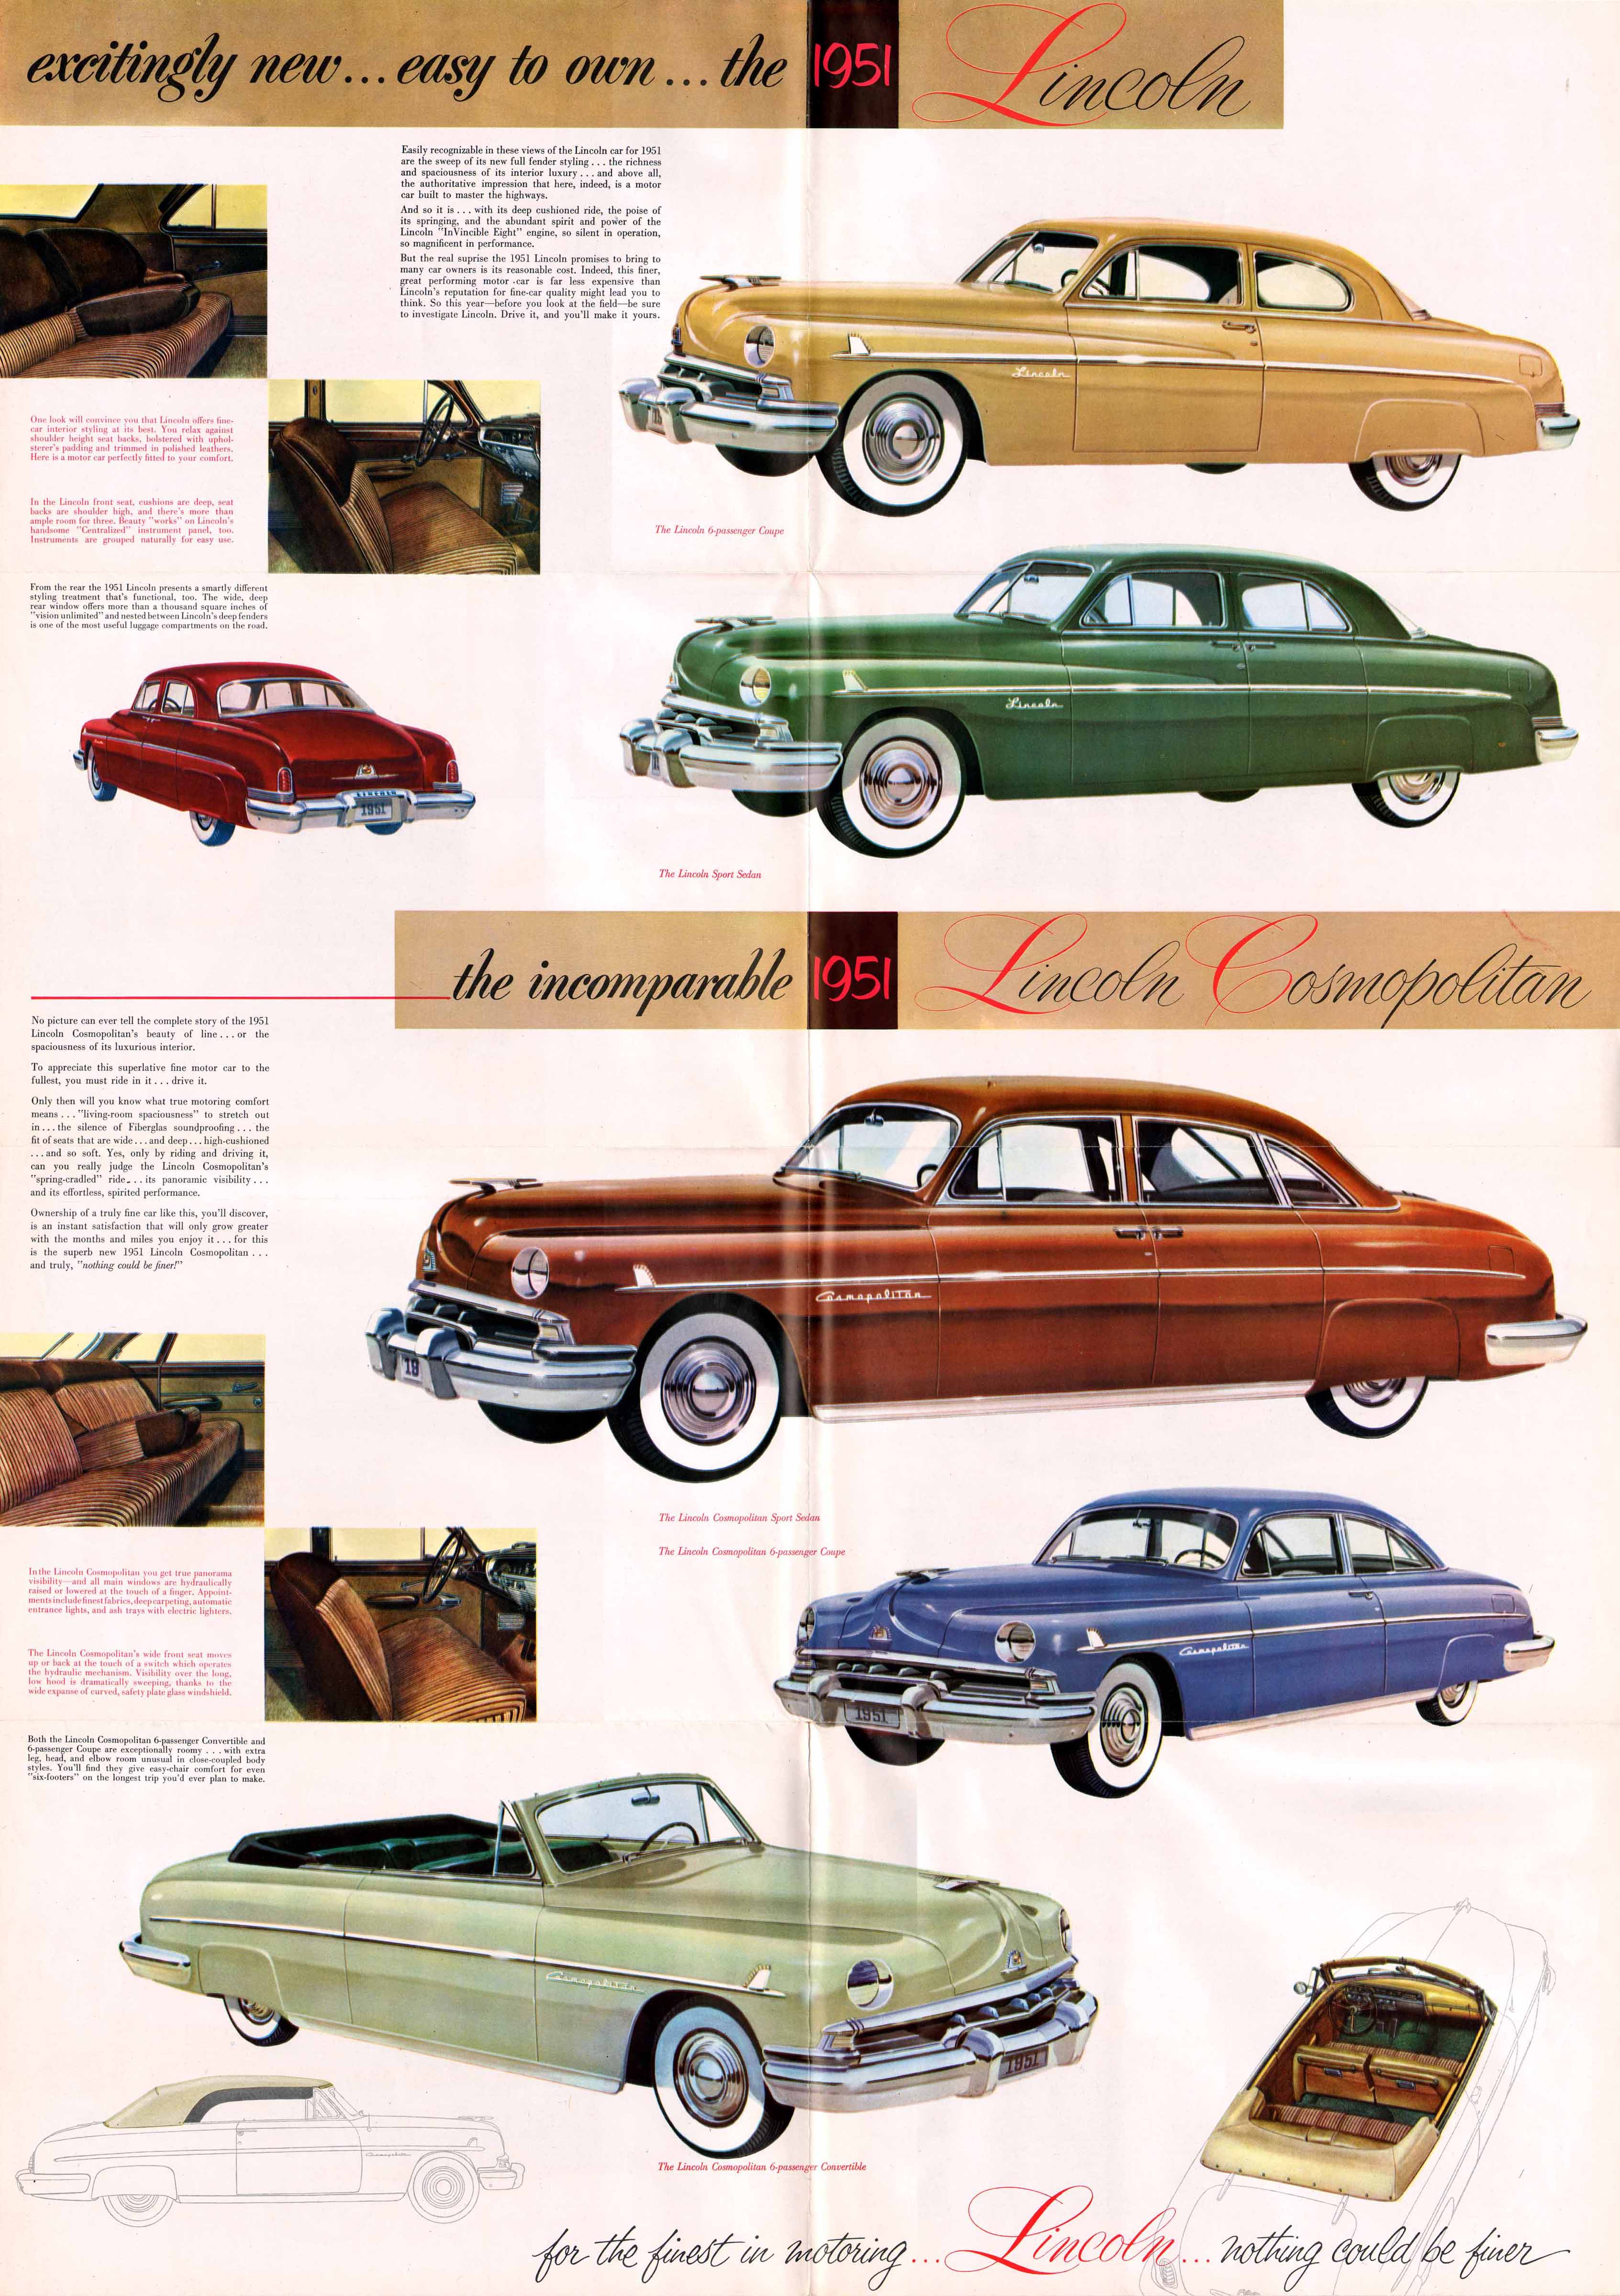 1951 Lincoln Foldout-08-09-10-11-12-13-14-15